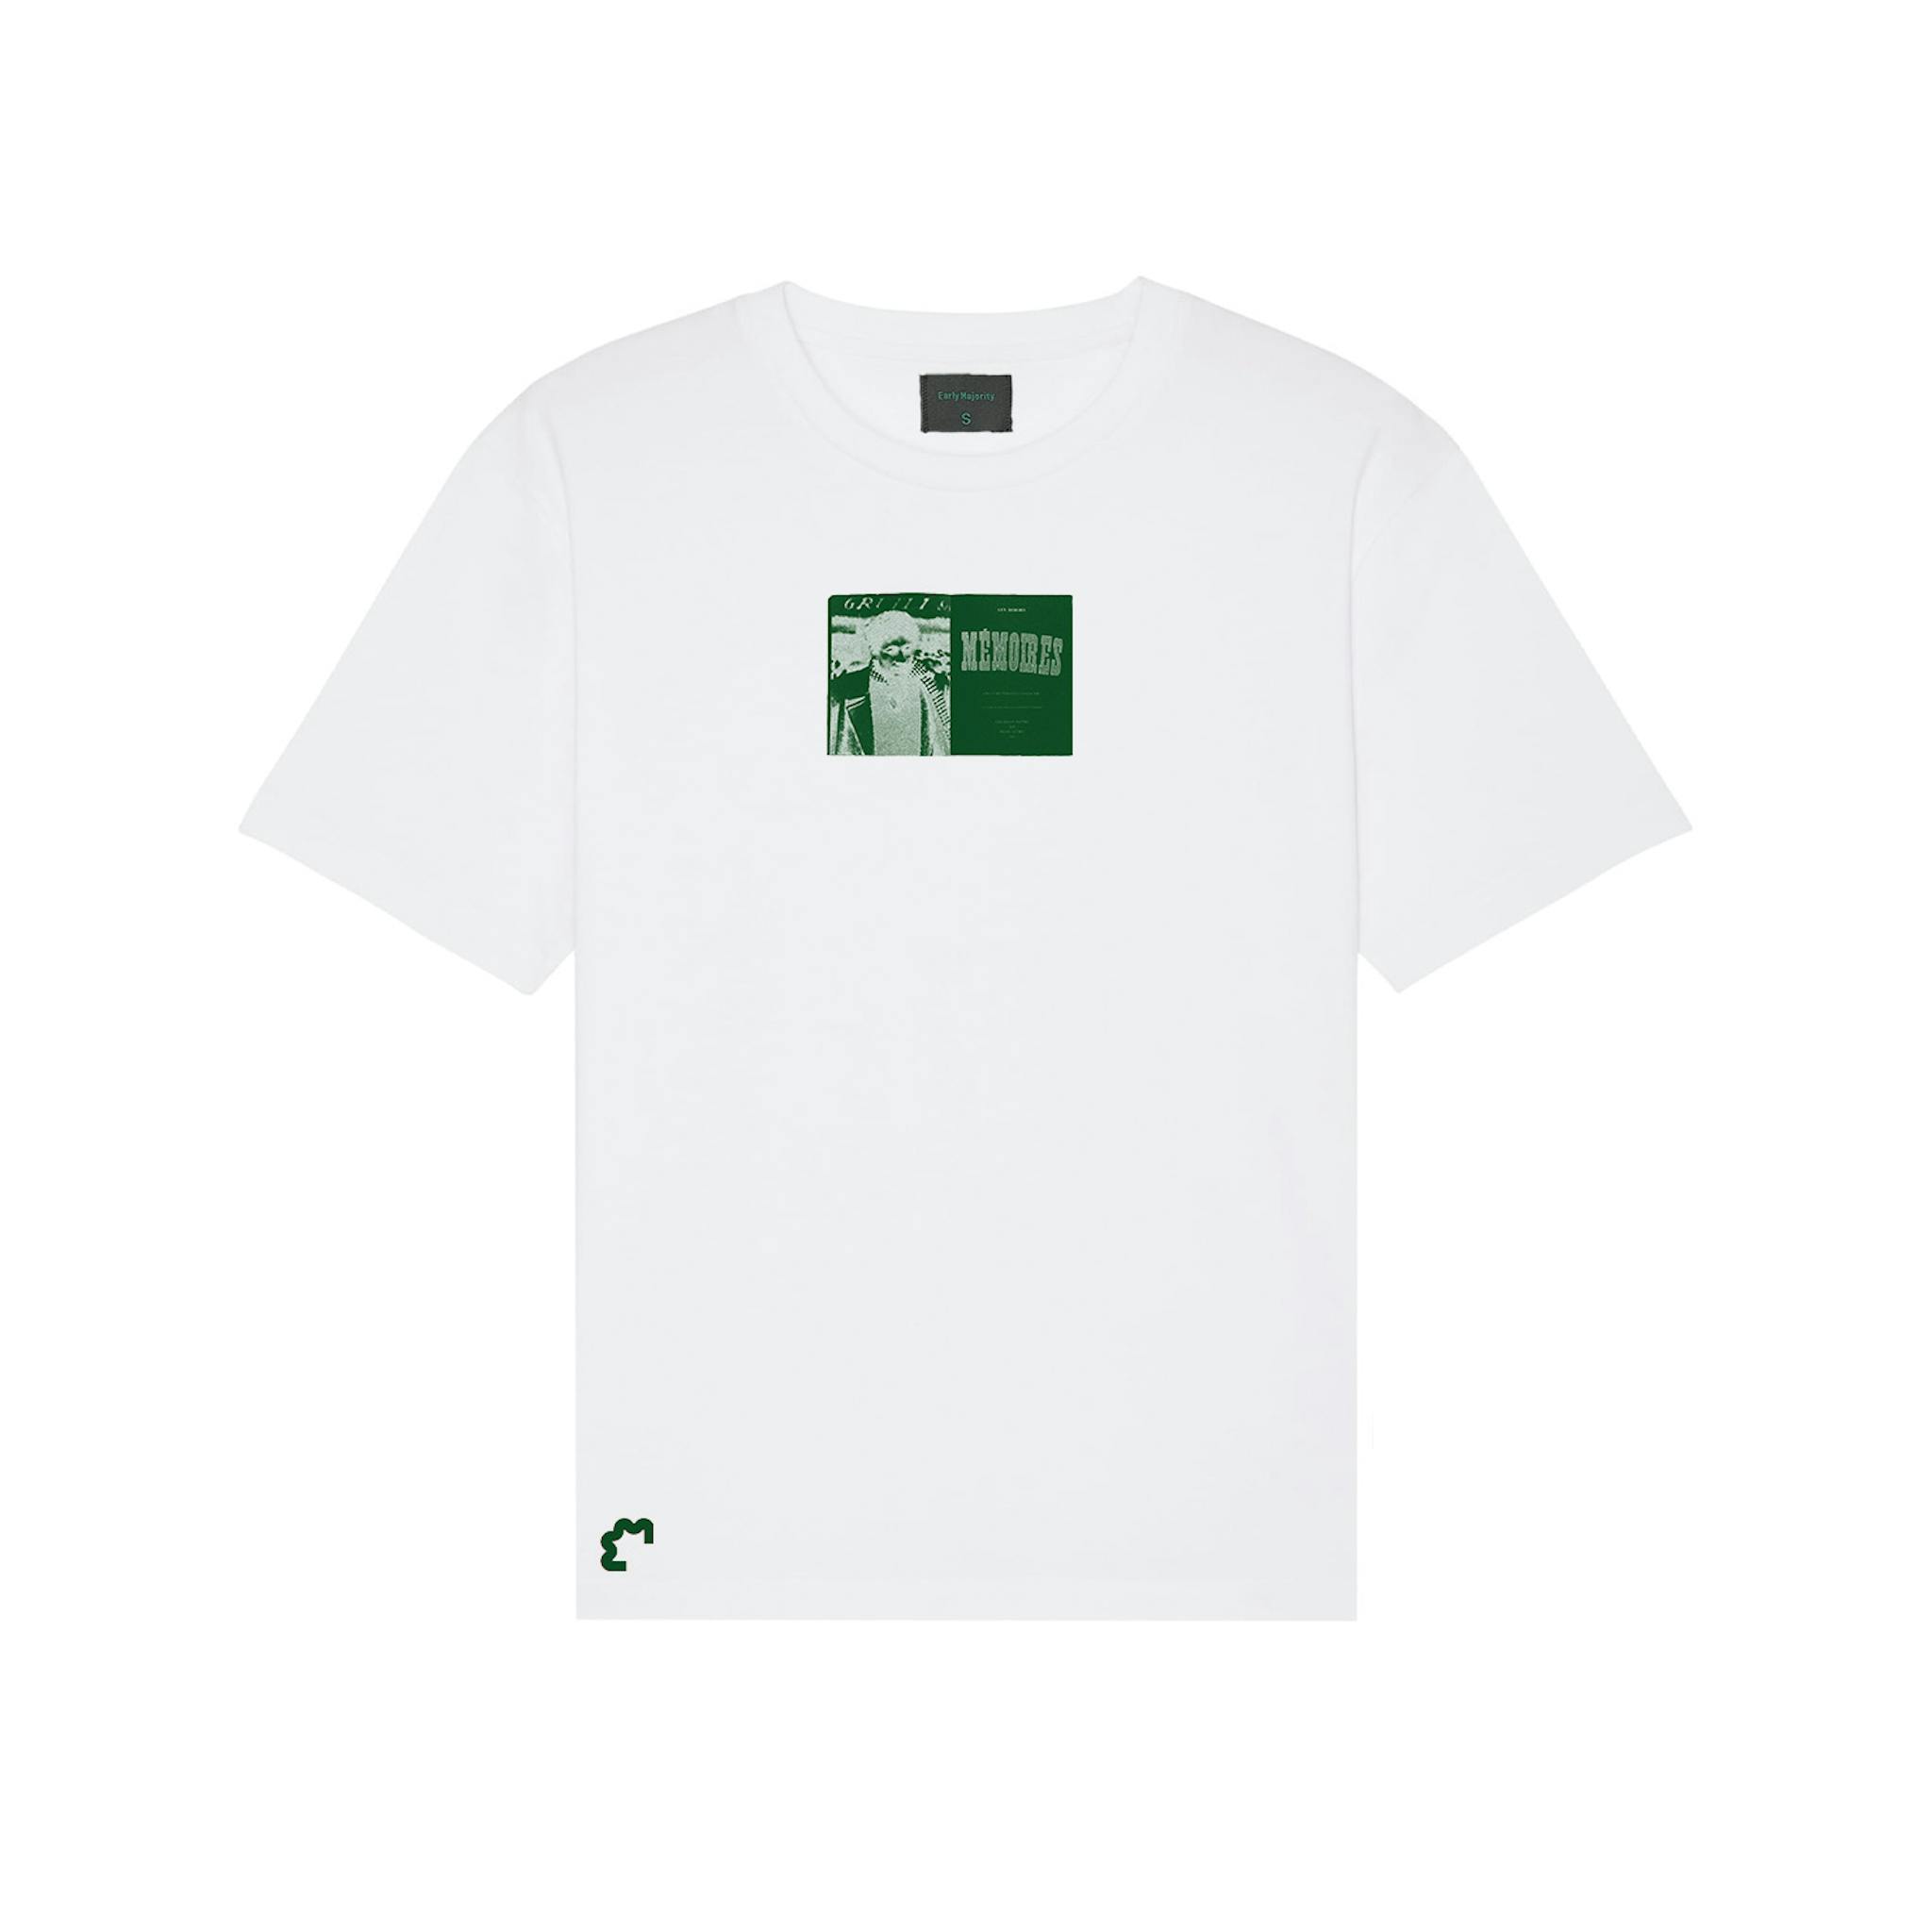 A white t-shirt with a green rectangular graphic and text on the front.